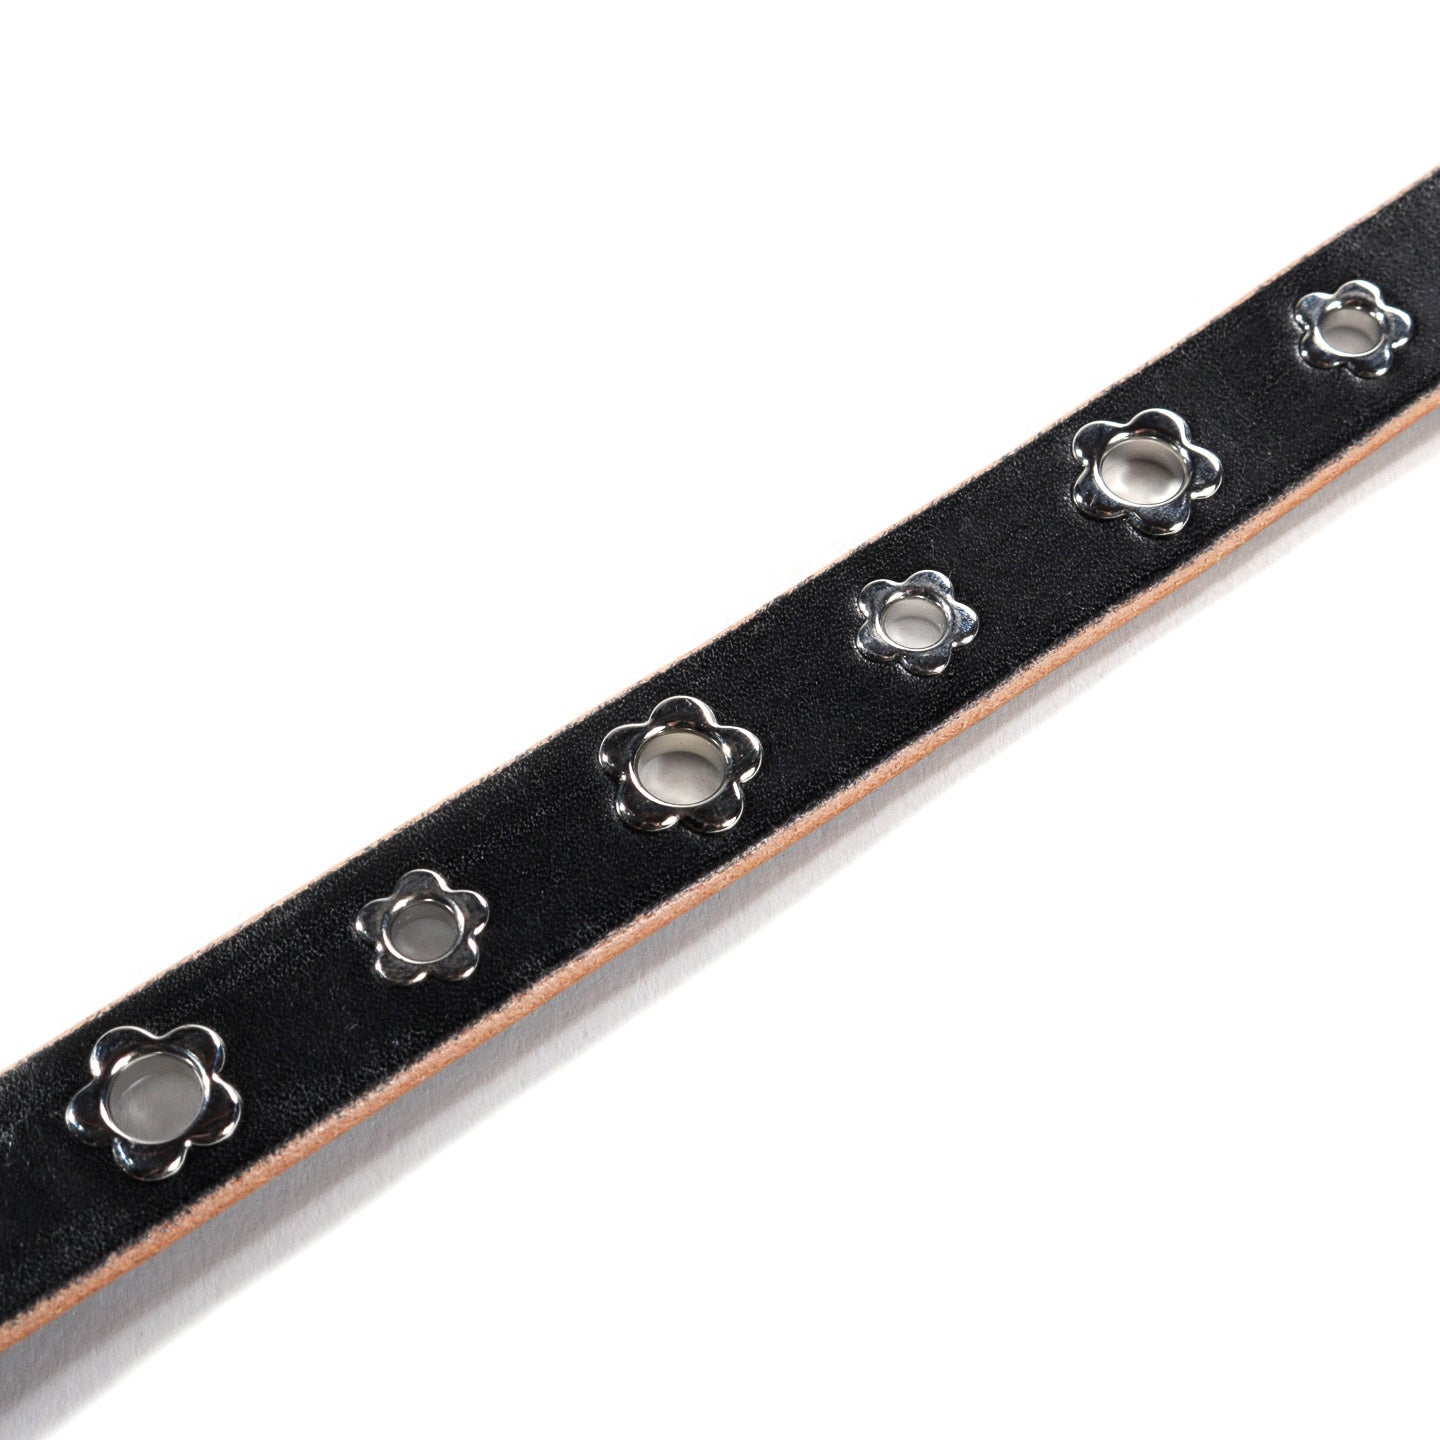 Only 86.00 usd for OUR LEGACY 2CM BELT FLOWERS ON BLACK LEATHER